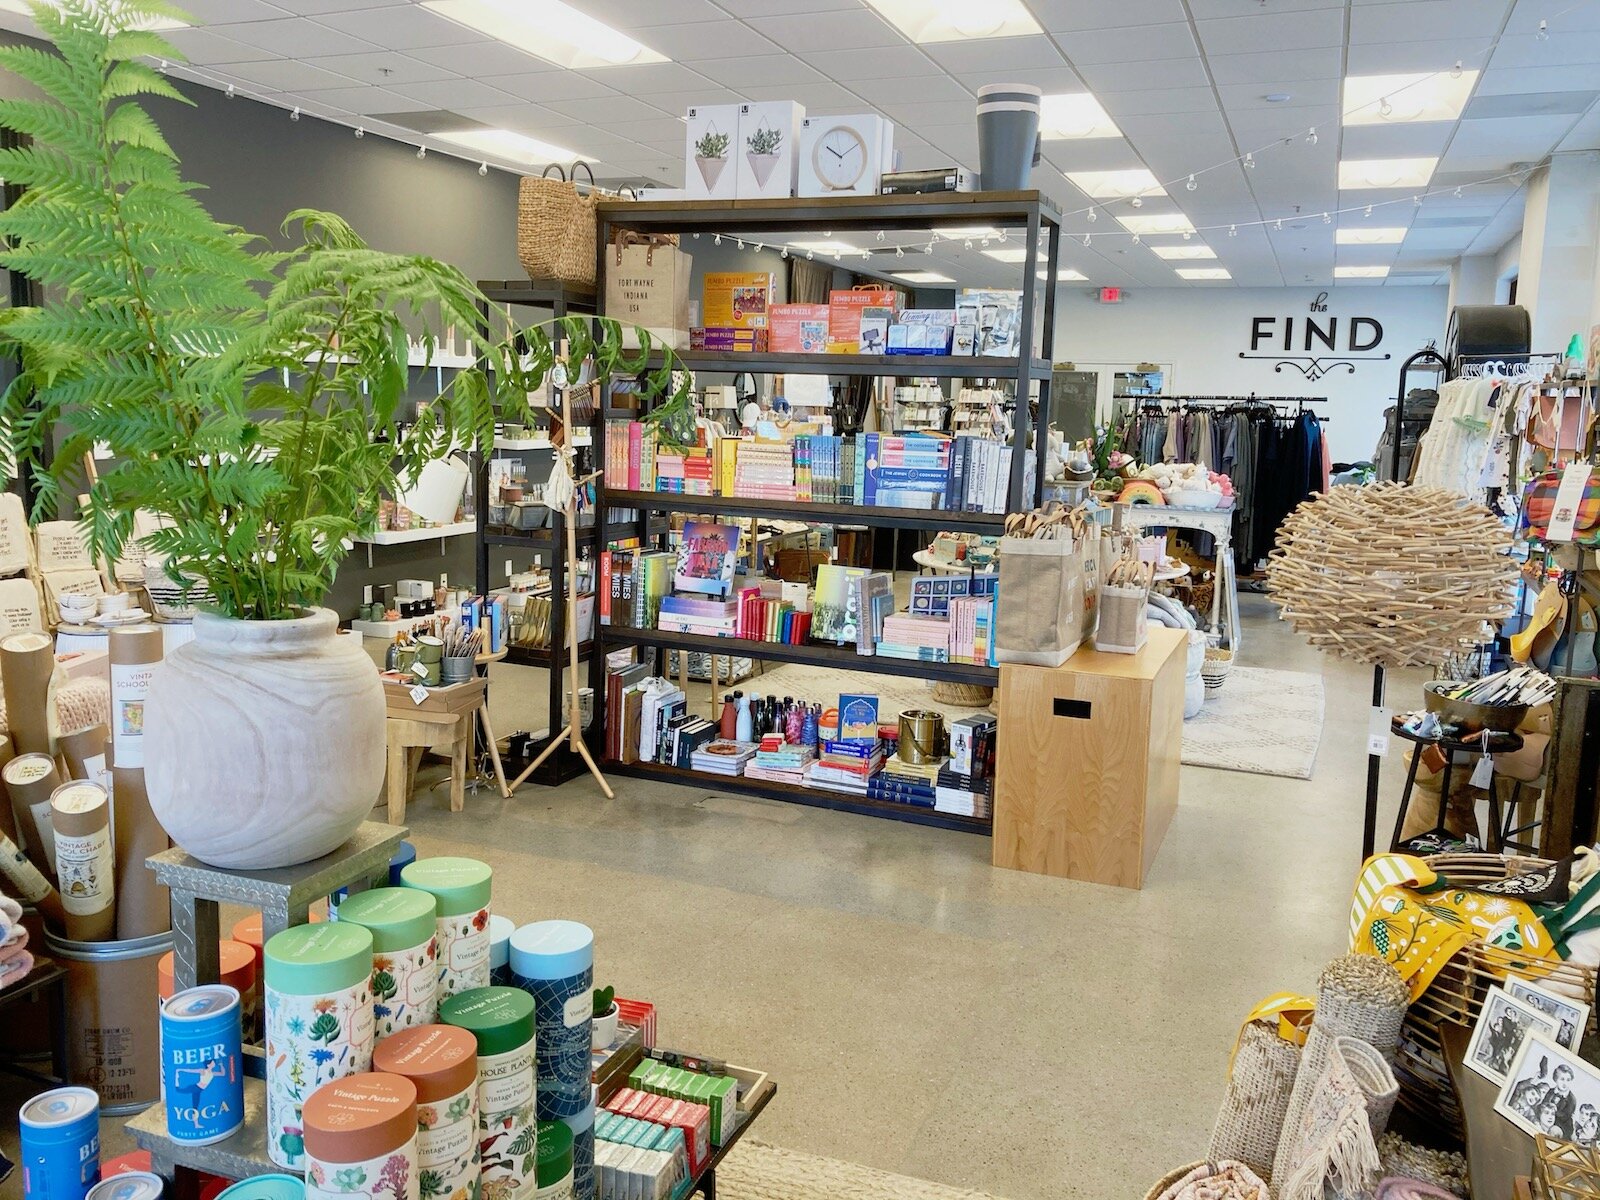 The Find sells women's clothing and accessories, children and baby items, as well as unique gifts and home decor.